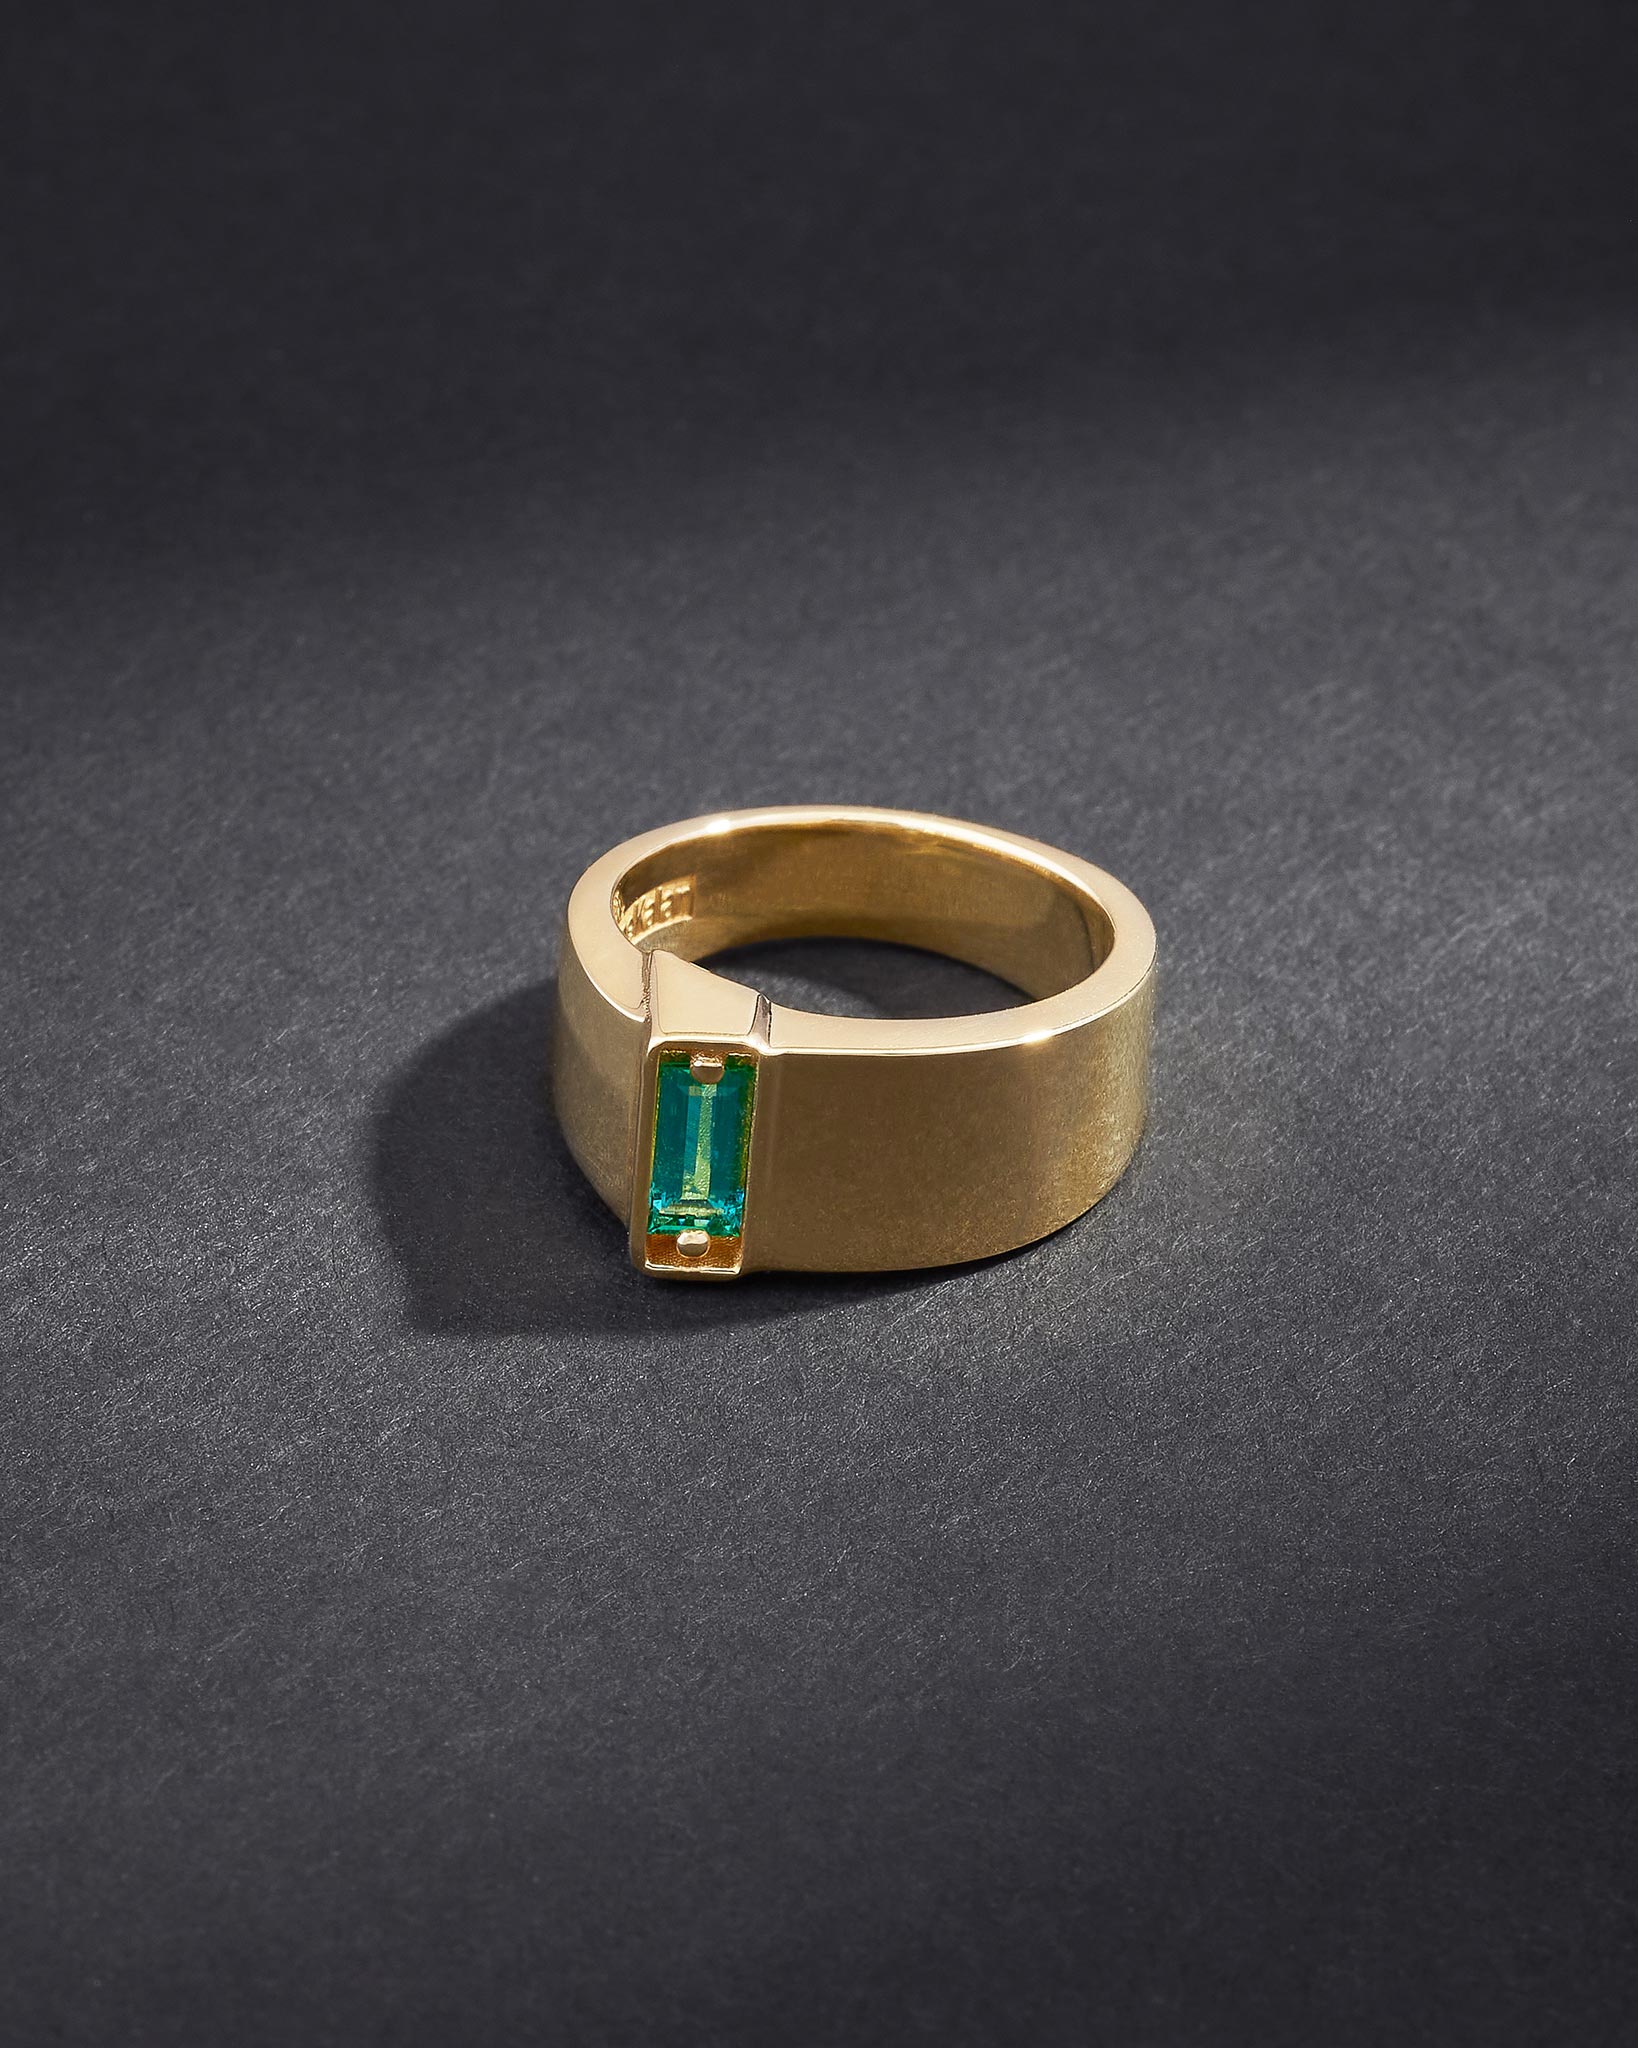 Suzanne Kalan One of a Kind Single Baguette Emerald Band in 18k yellow gold